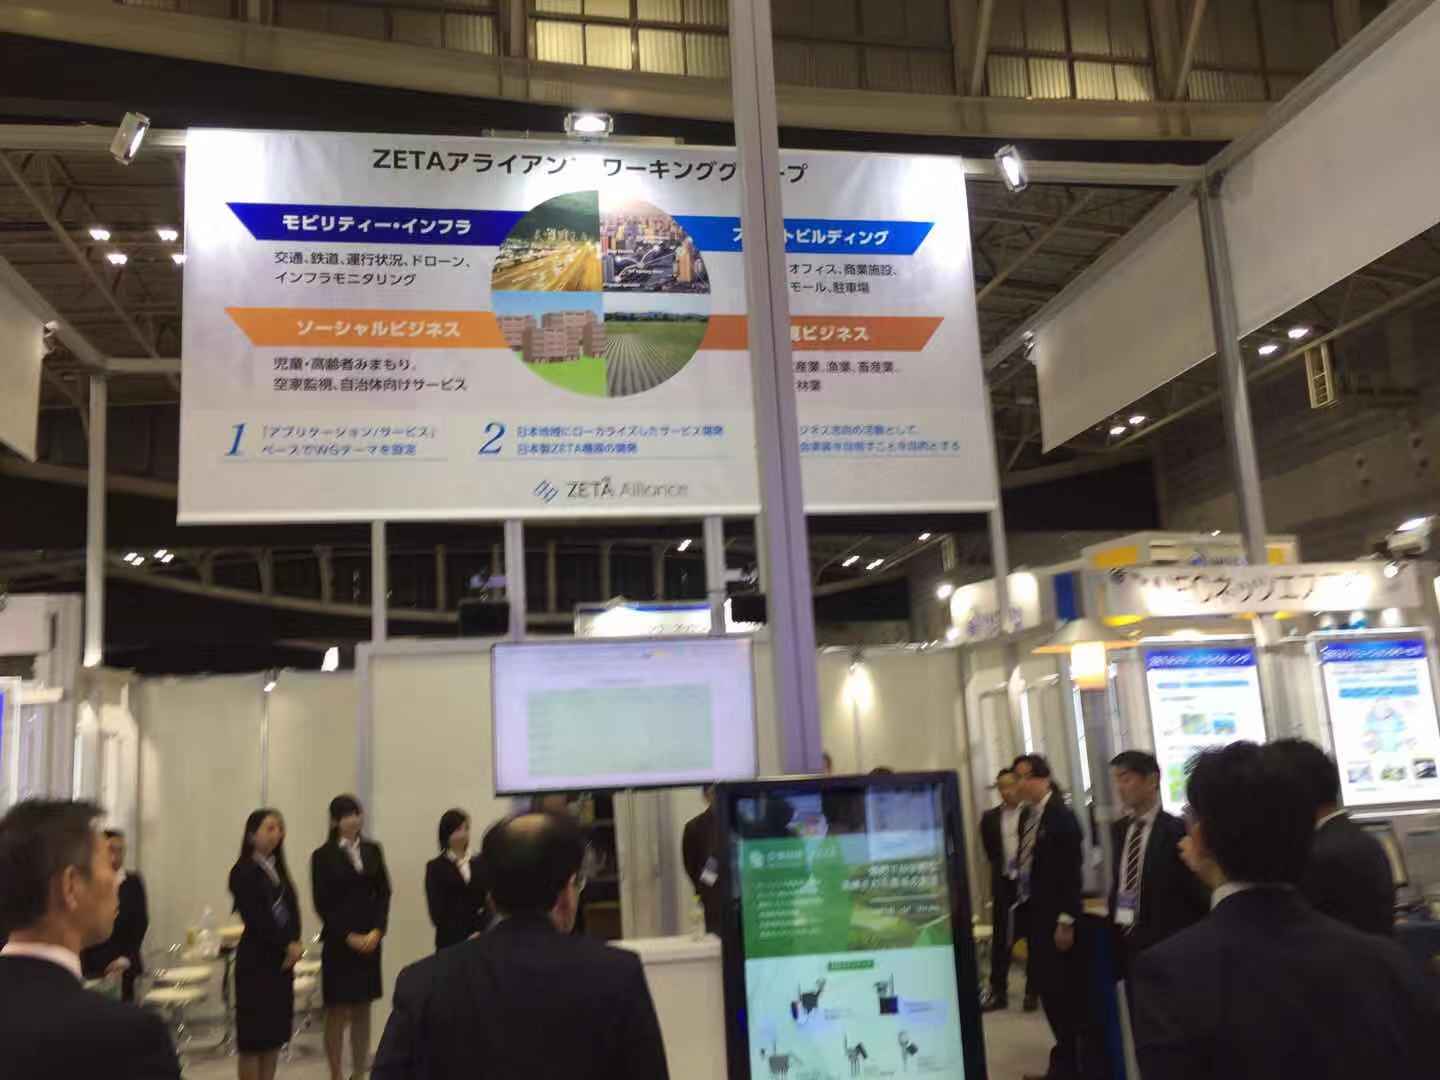 A new horizon is created for IoT -“ZETA” ecosystem unveiled LPWAN 2.0 in the ETIoT conference in Japan